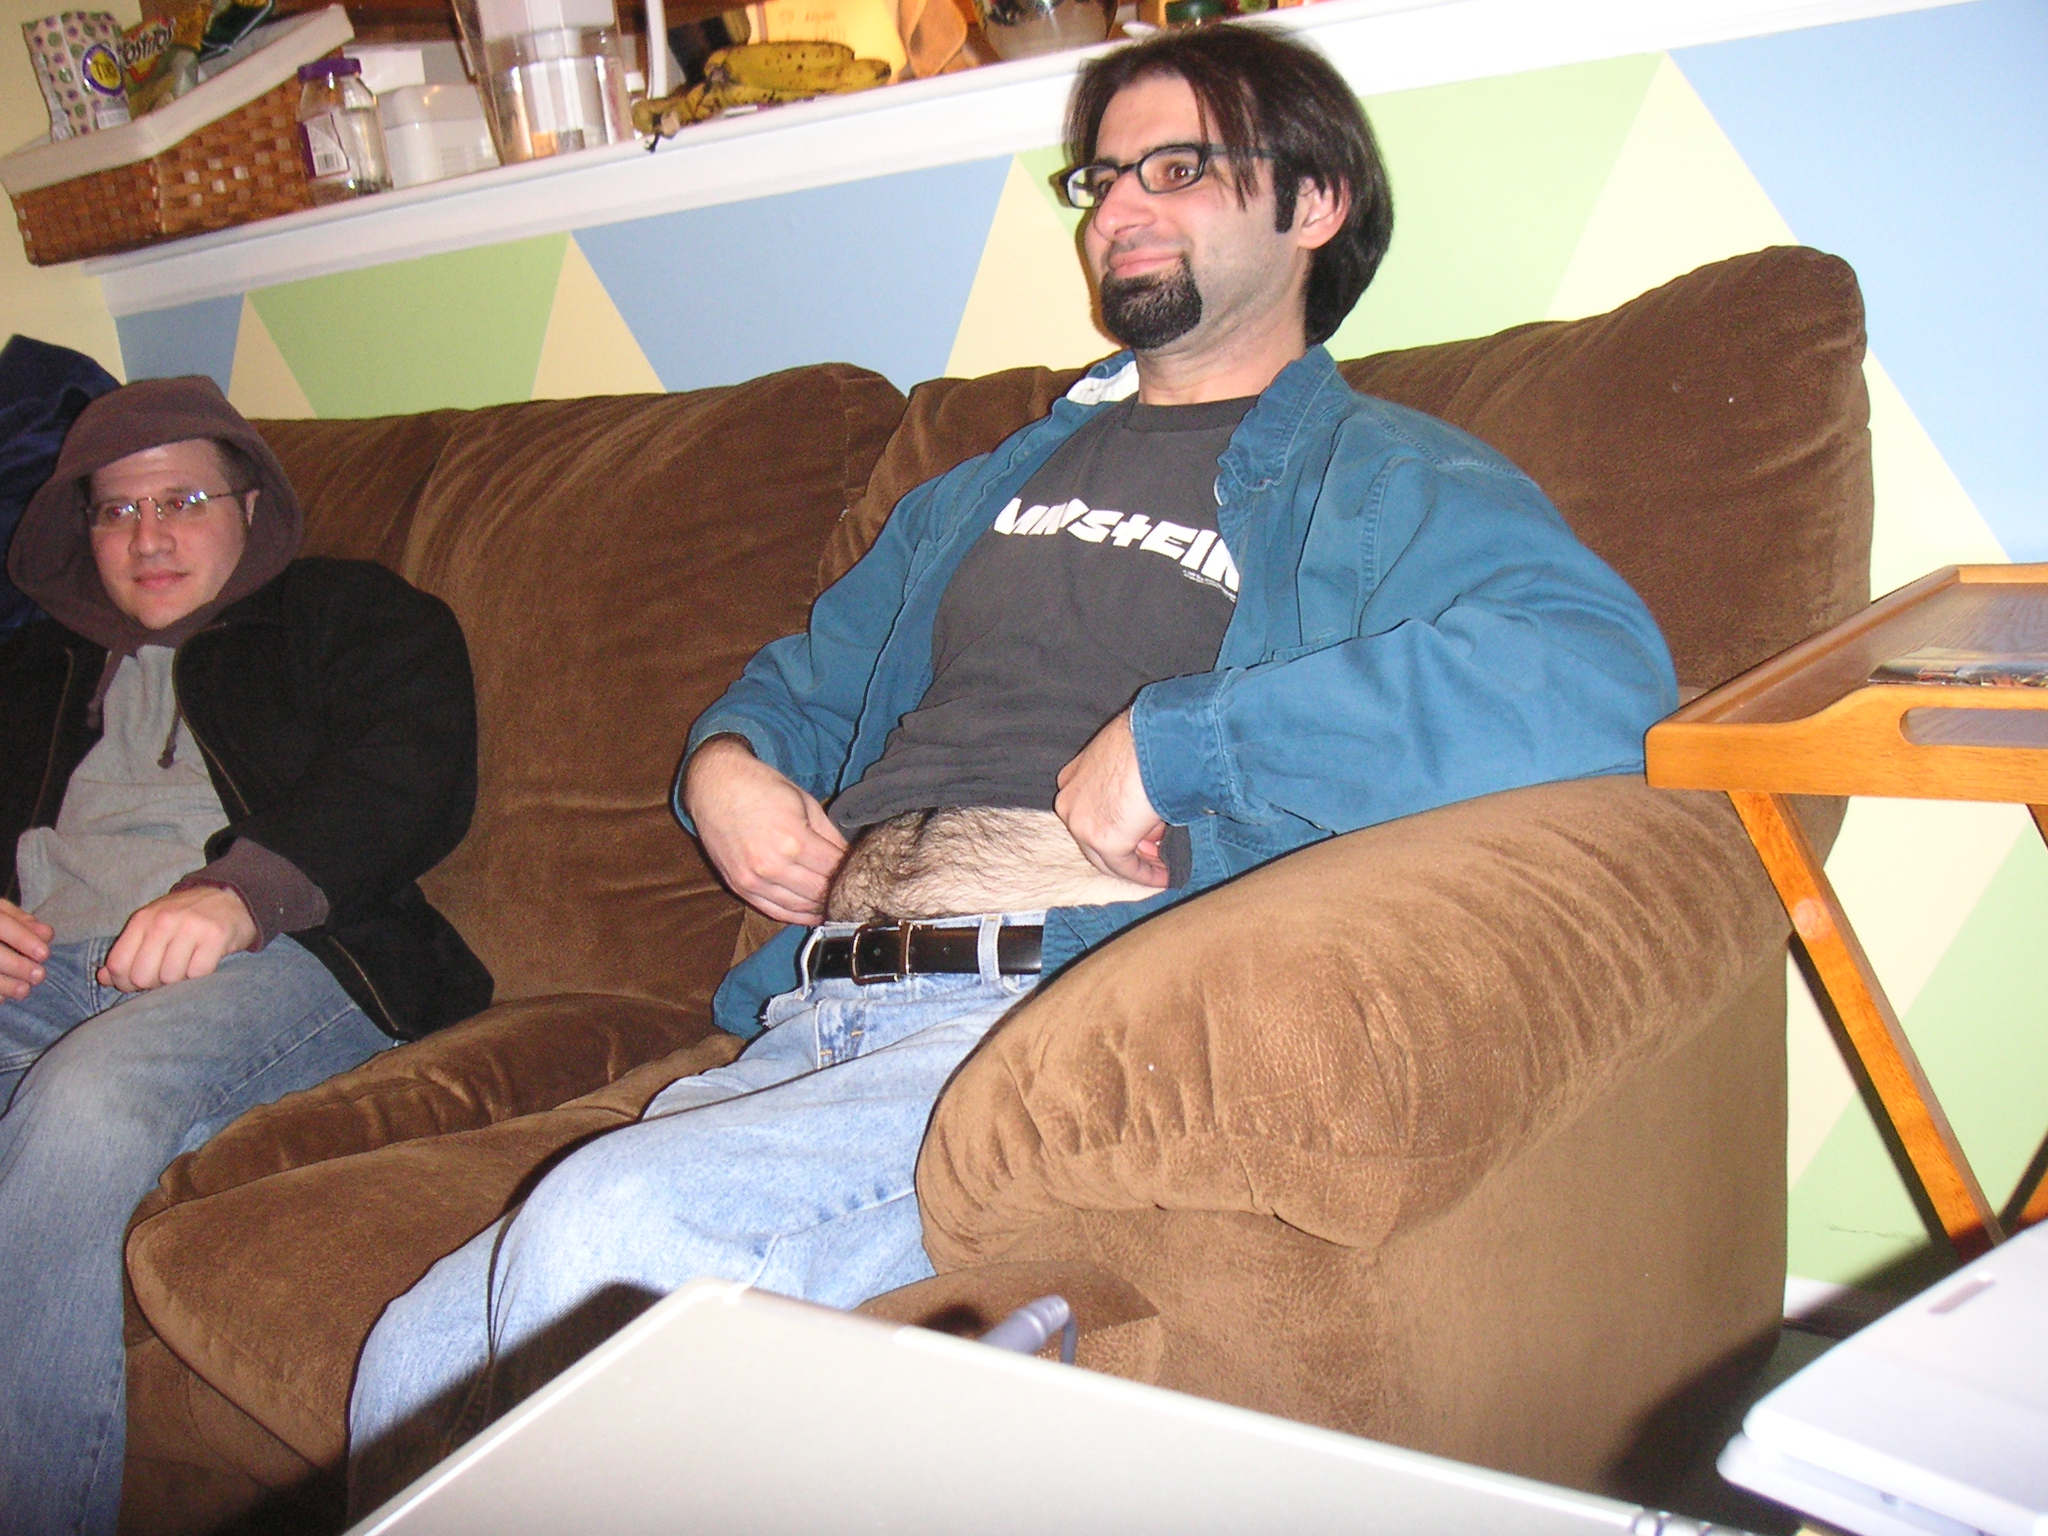 two people sitting on a brown couch with blue and yellow wall behind them